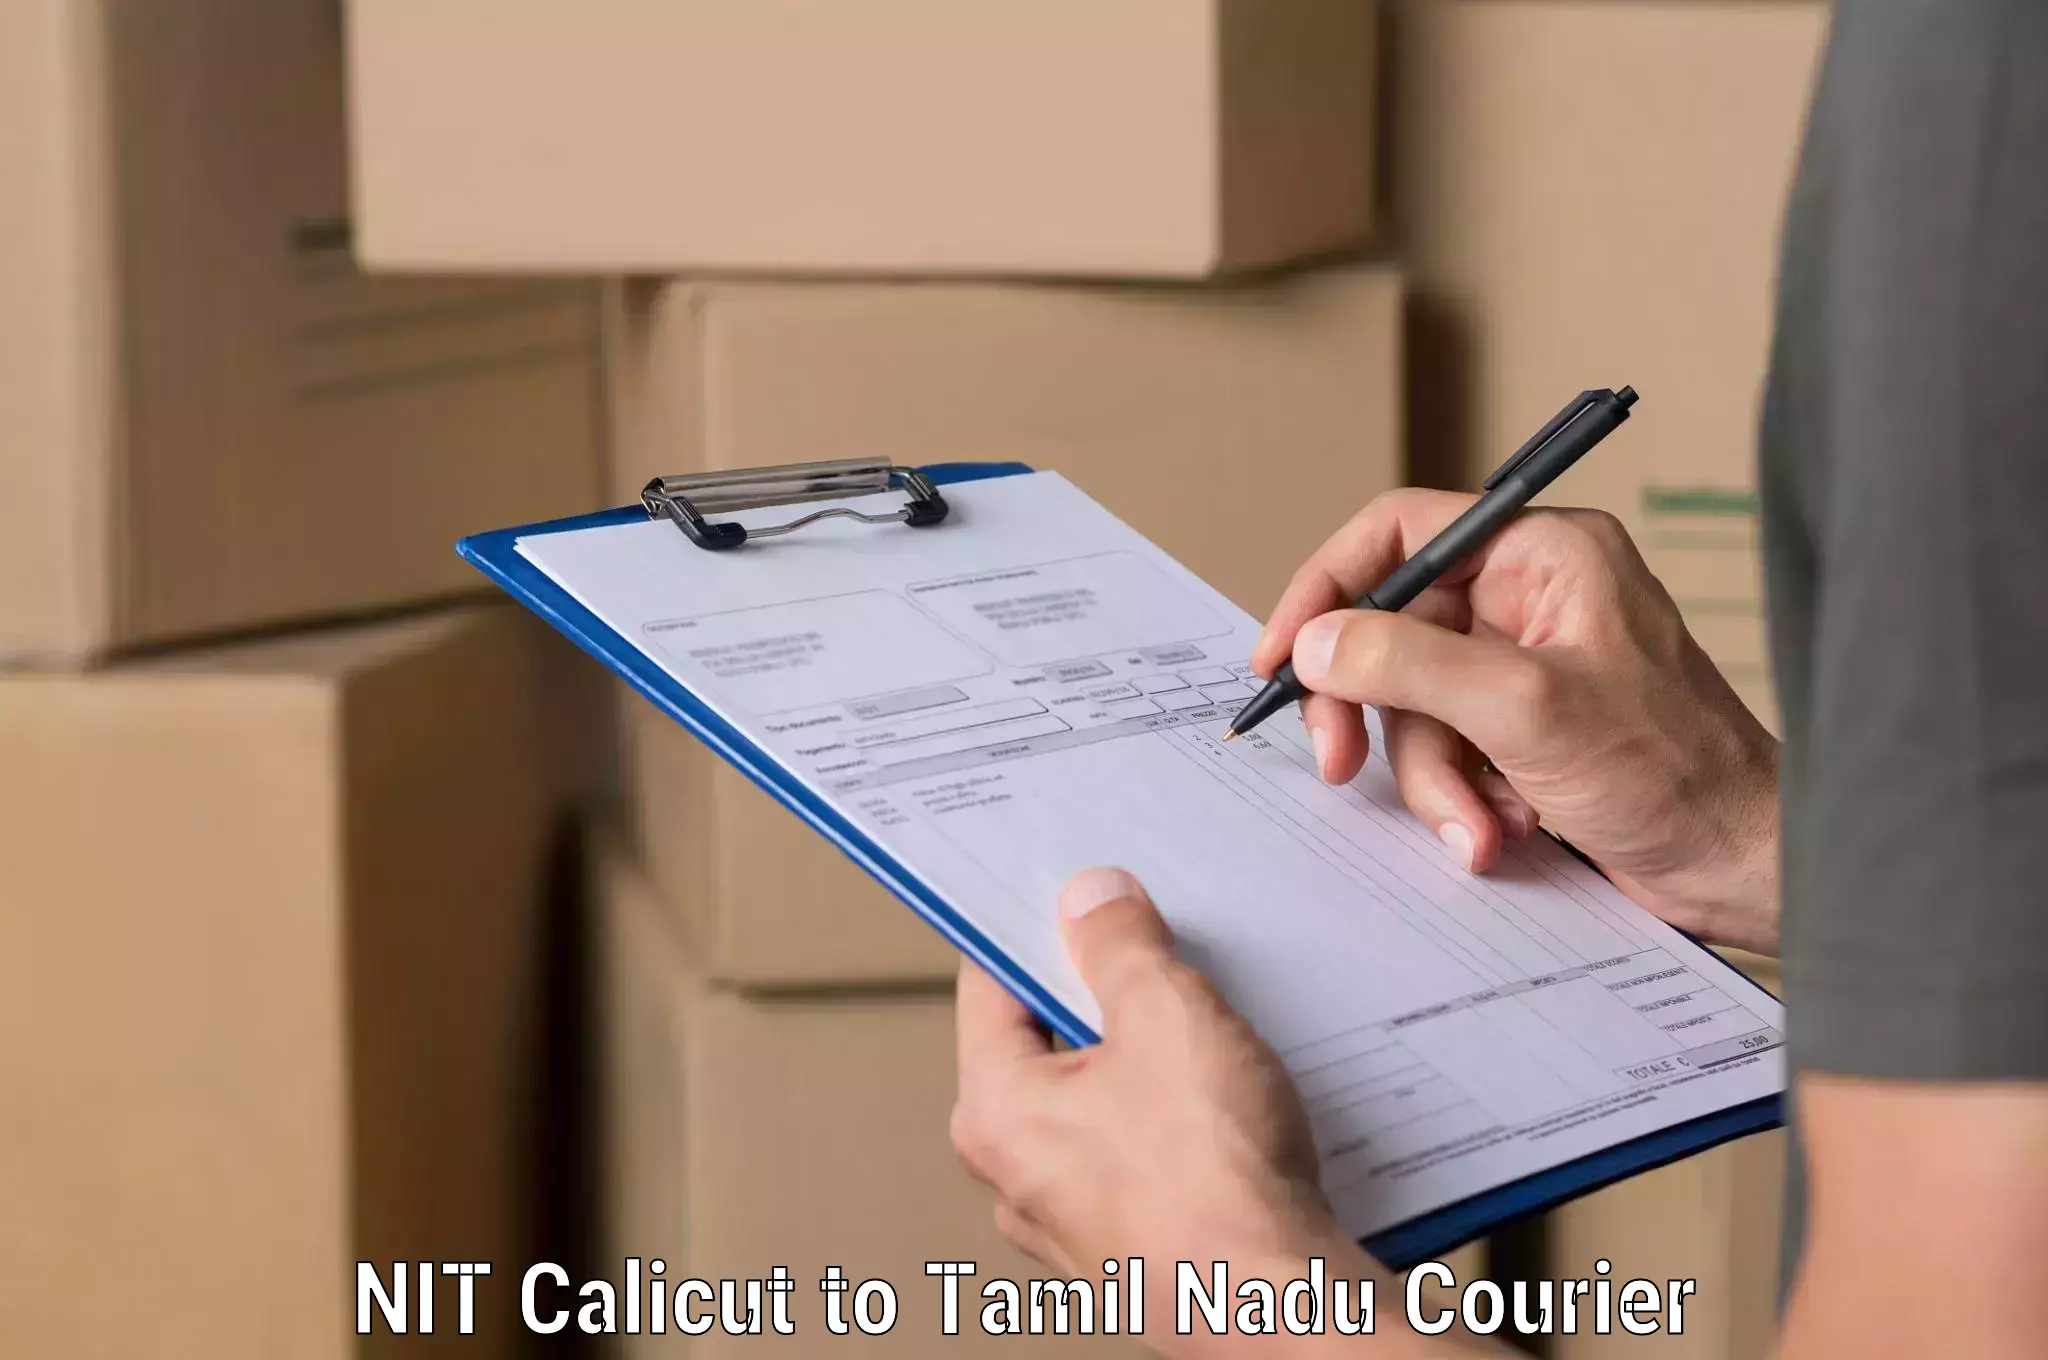 Cargo courier service NIT Calicut to Ennore Port Chennai